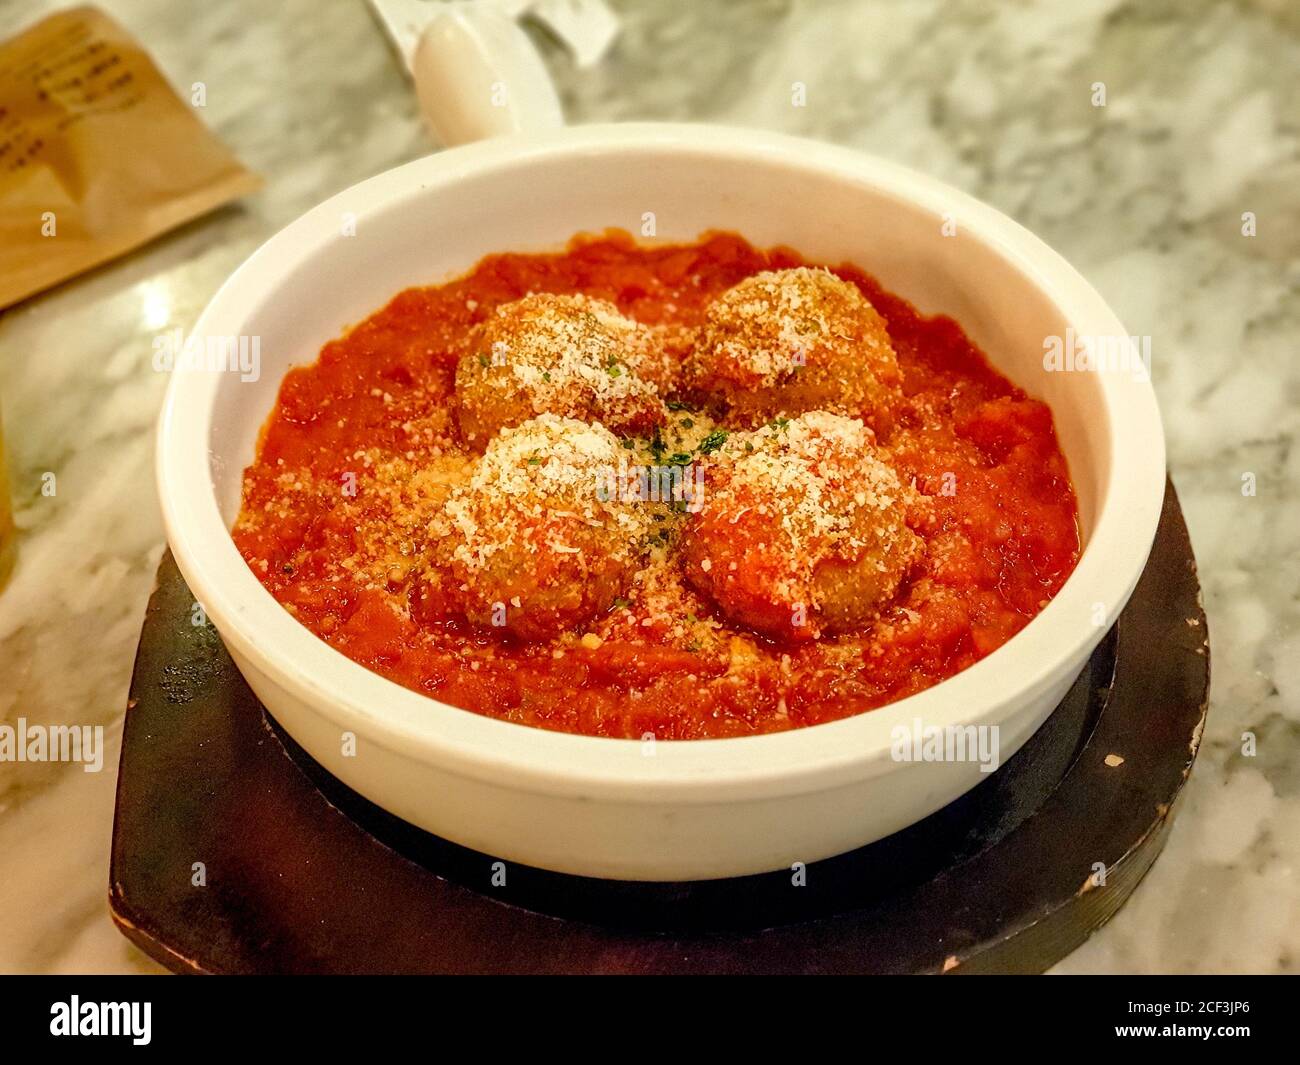 Meatball, ground meat rolled into a small ball, along with other ingredients, such as bread crumbs, minced onion, eggs, butter, and seasoning. Stock Photo